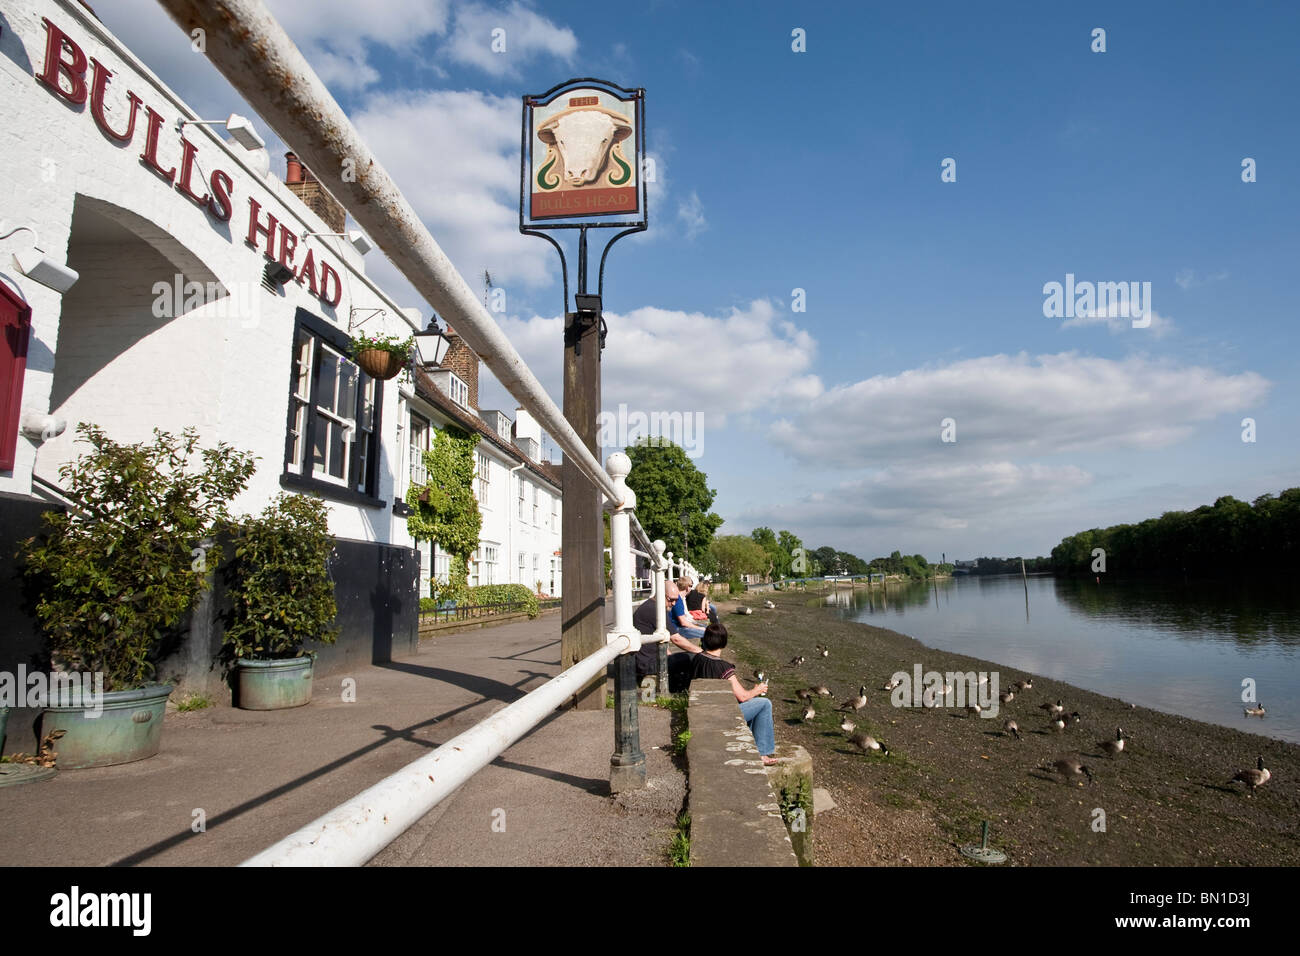 The Bulls Head pub by the river Thames. Strand on the Green, Chiswick, London, England, UK Stock Photo